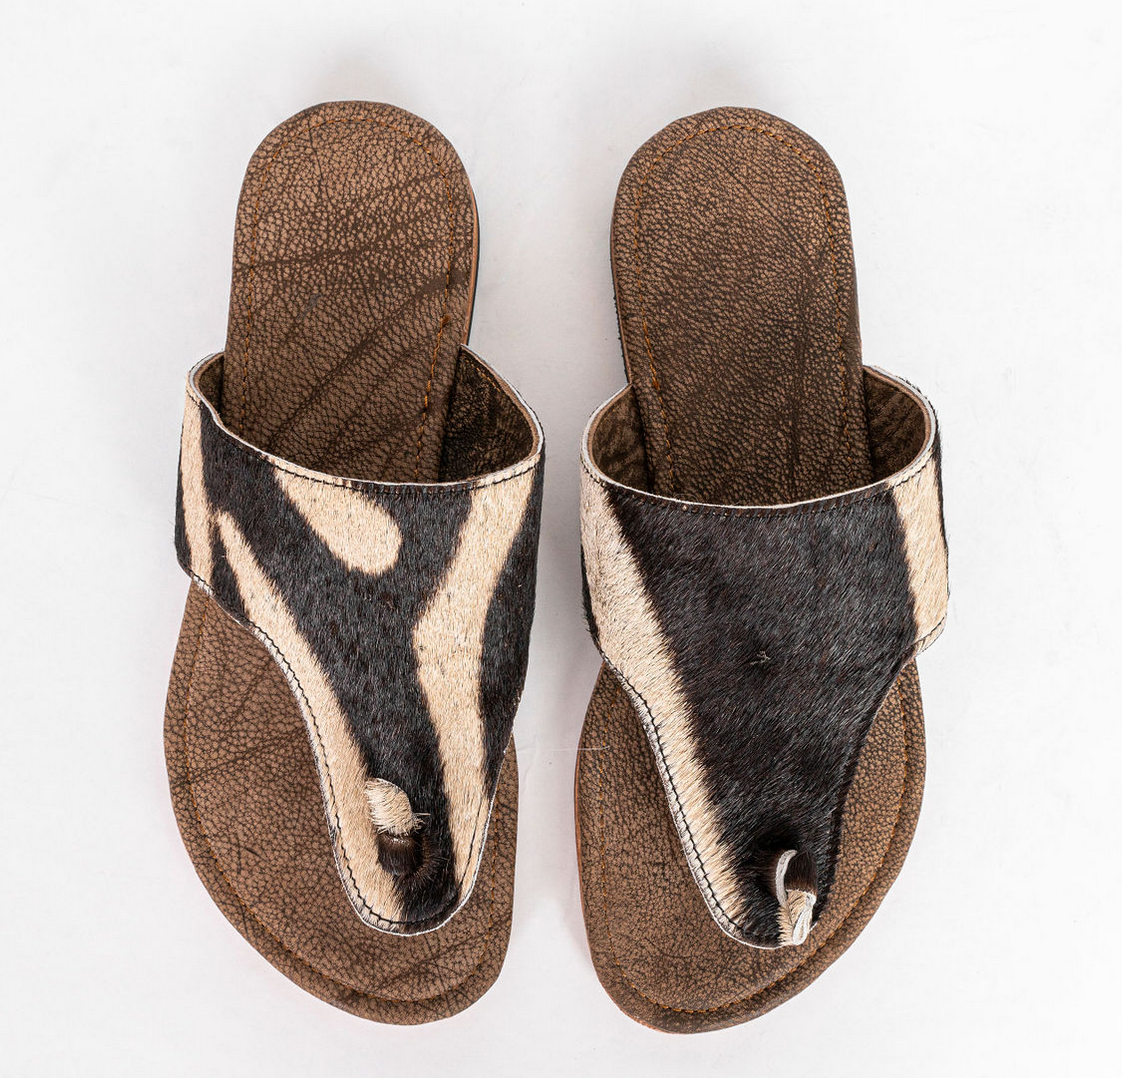 Woodstock Sandals - Norton and Hodges